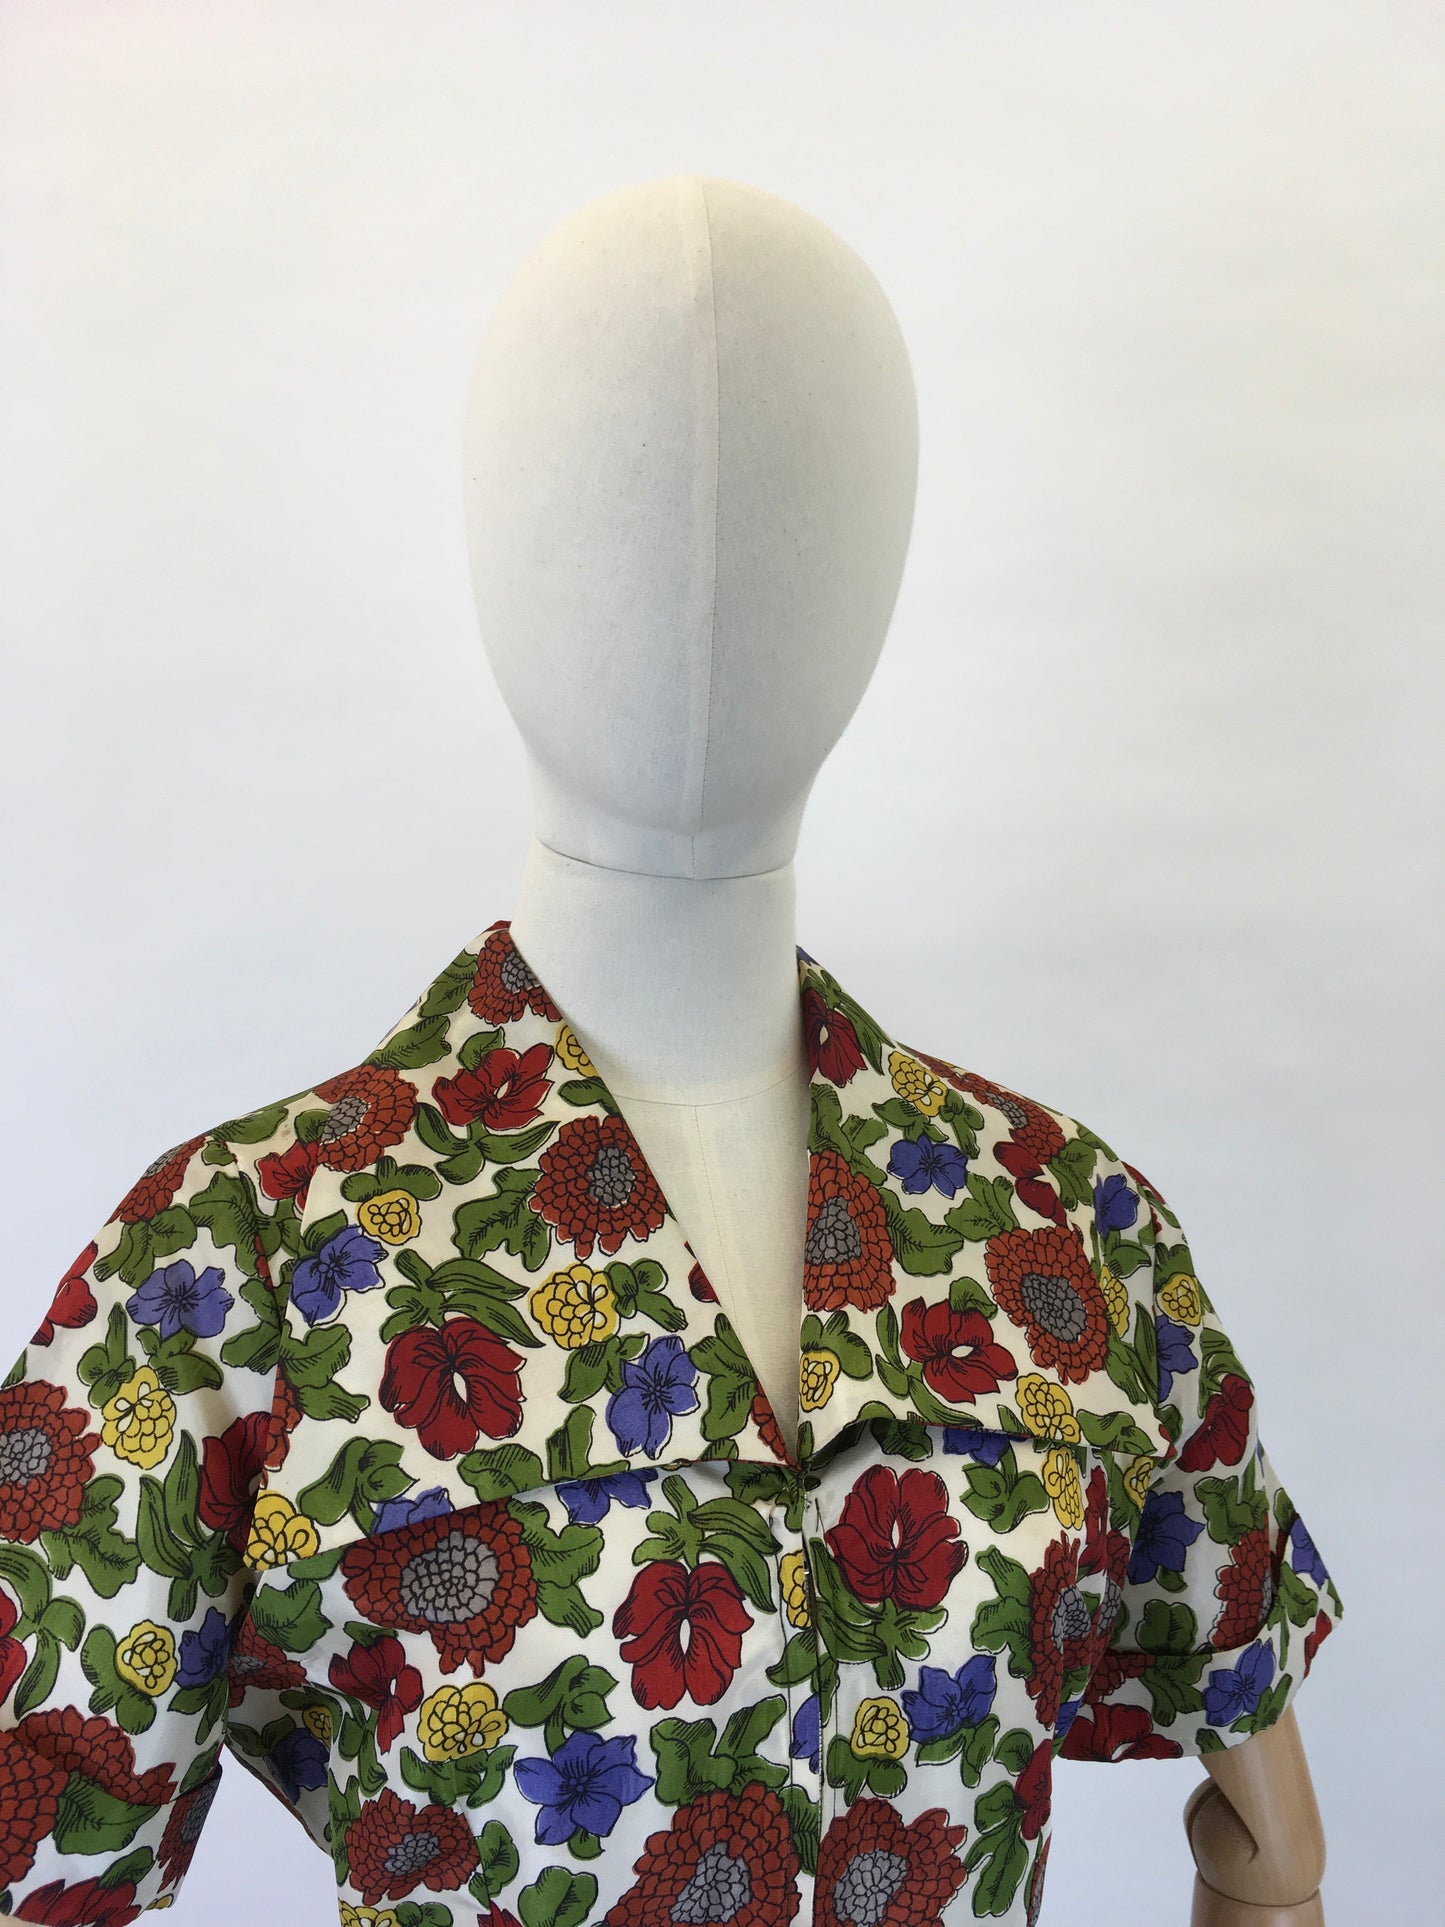 Original 1940s Floral Zip Front Dress - In Lovely Autumnal Shades of Rich Wines, Blues, Yellows and Greens